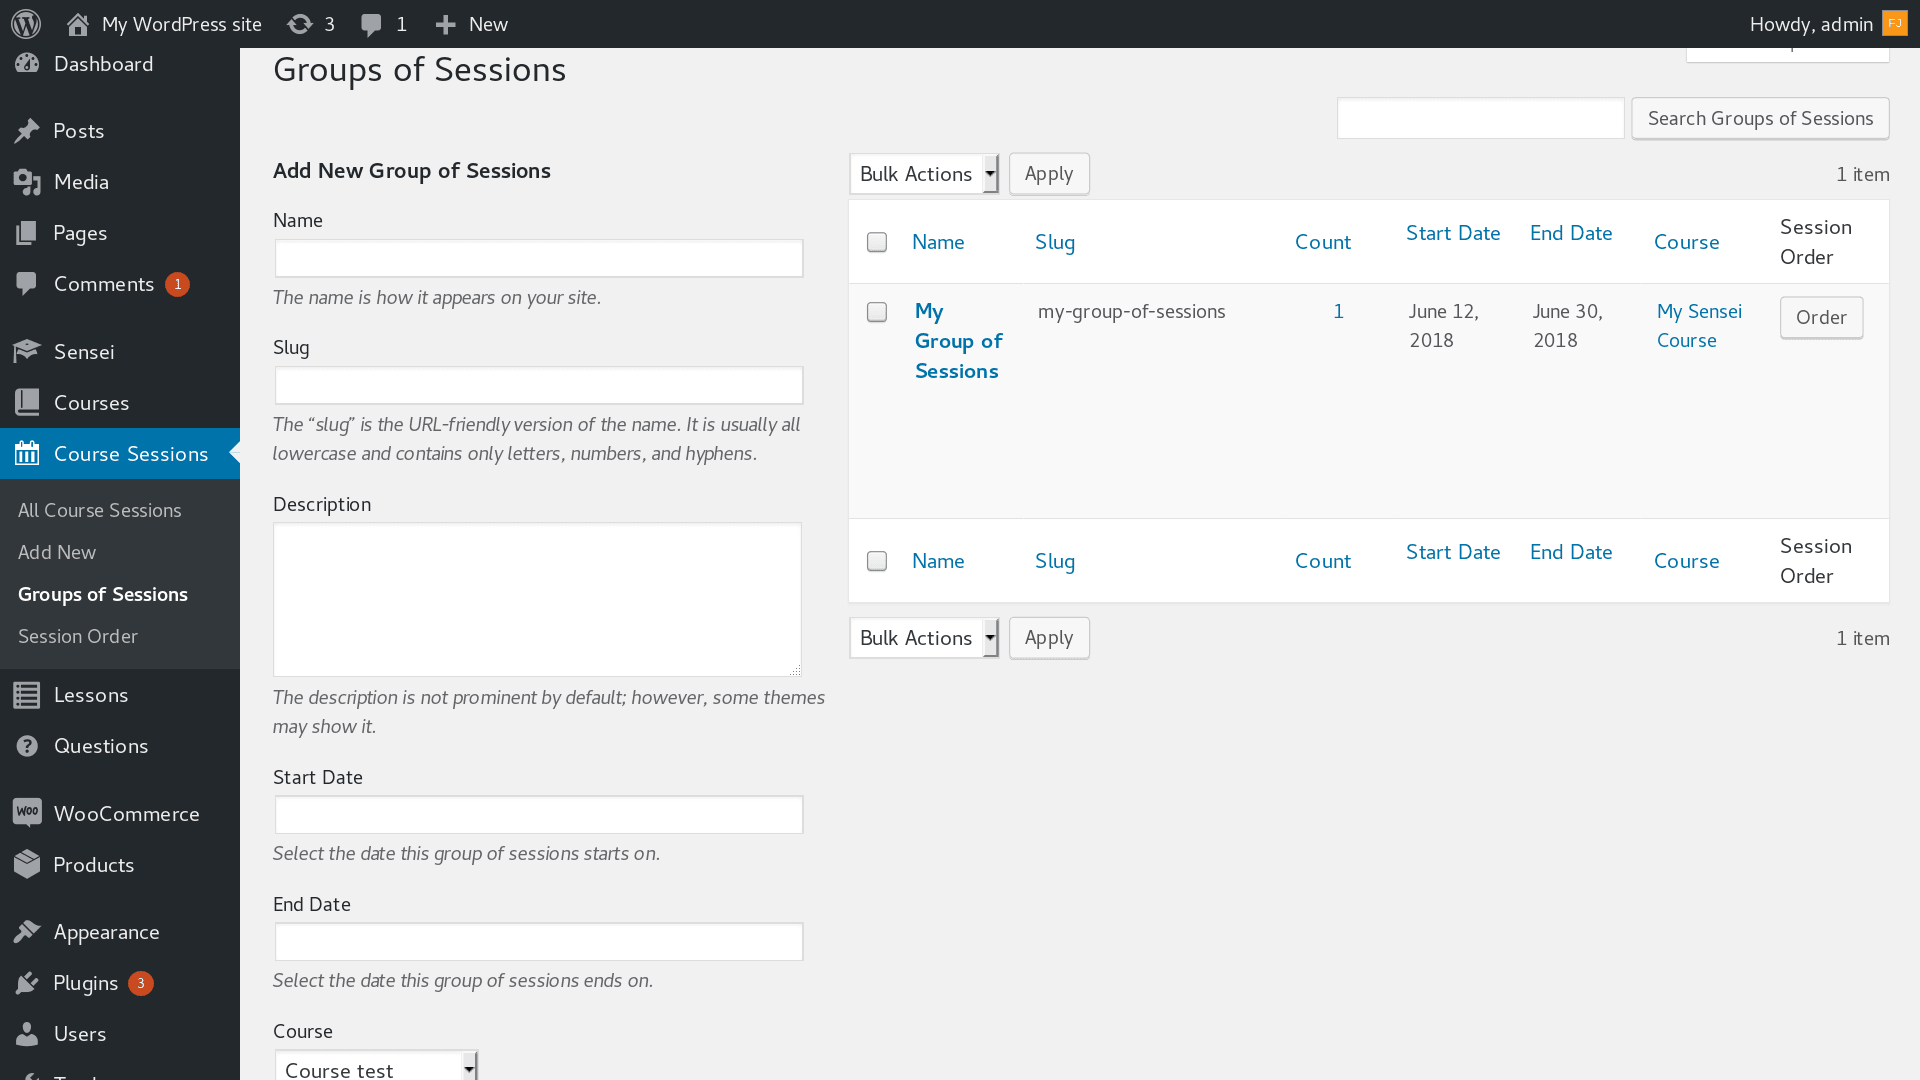 Group of Sessions screen. Add and manage Group of Sessions.